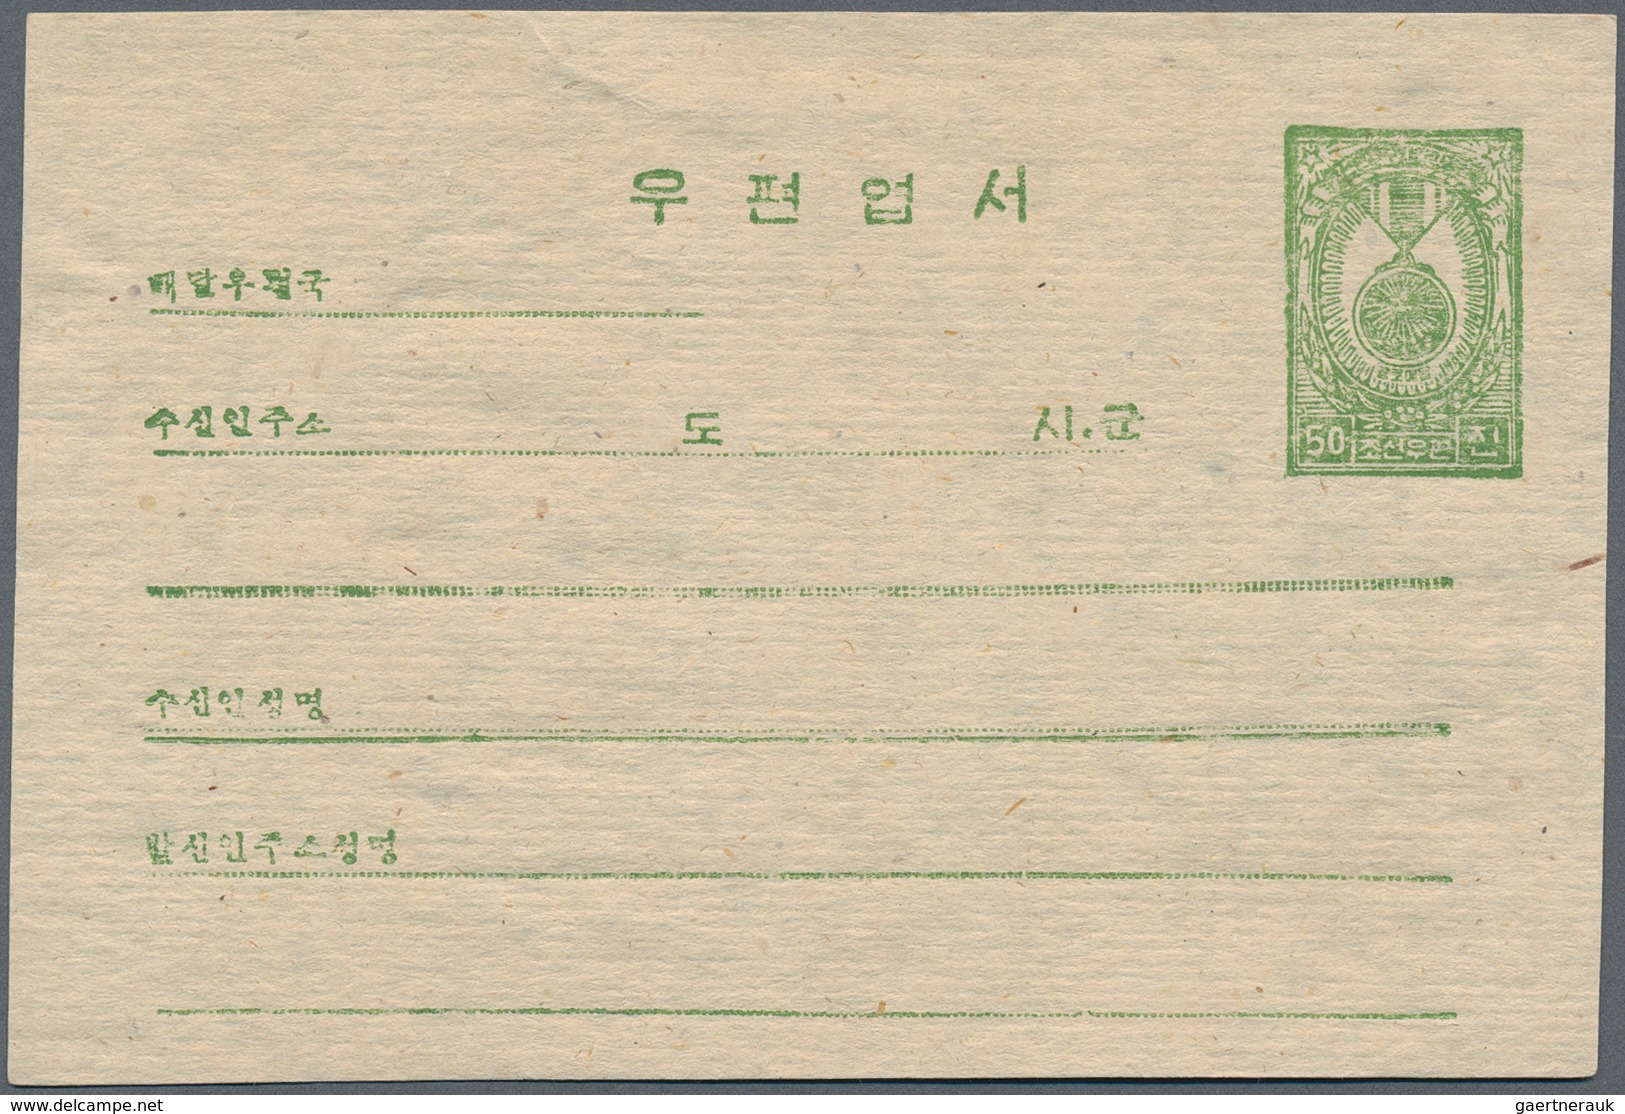 29496 Korea-Nord: 1950, stationery cards mint: 50 Ch. pale blue national flag (2). And 50 Ch. order of mer